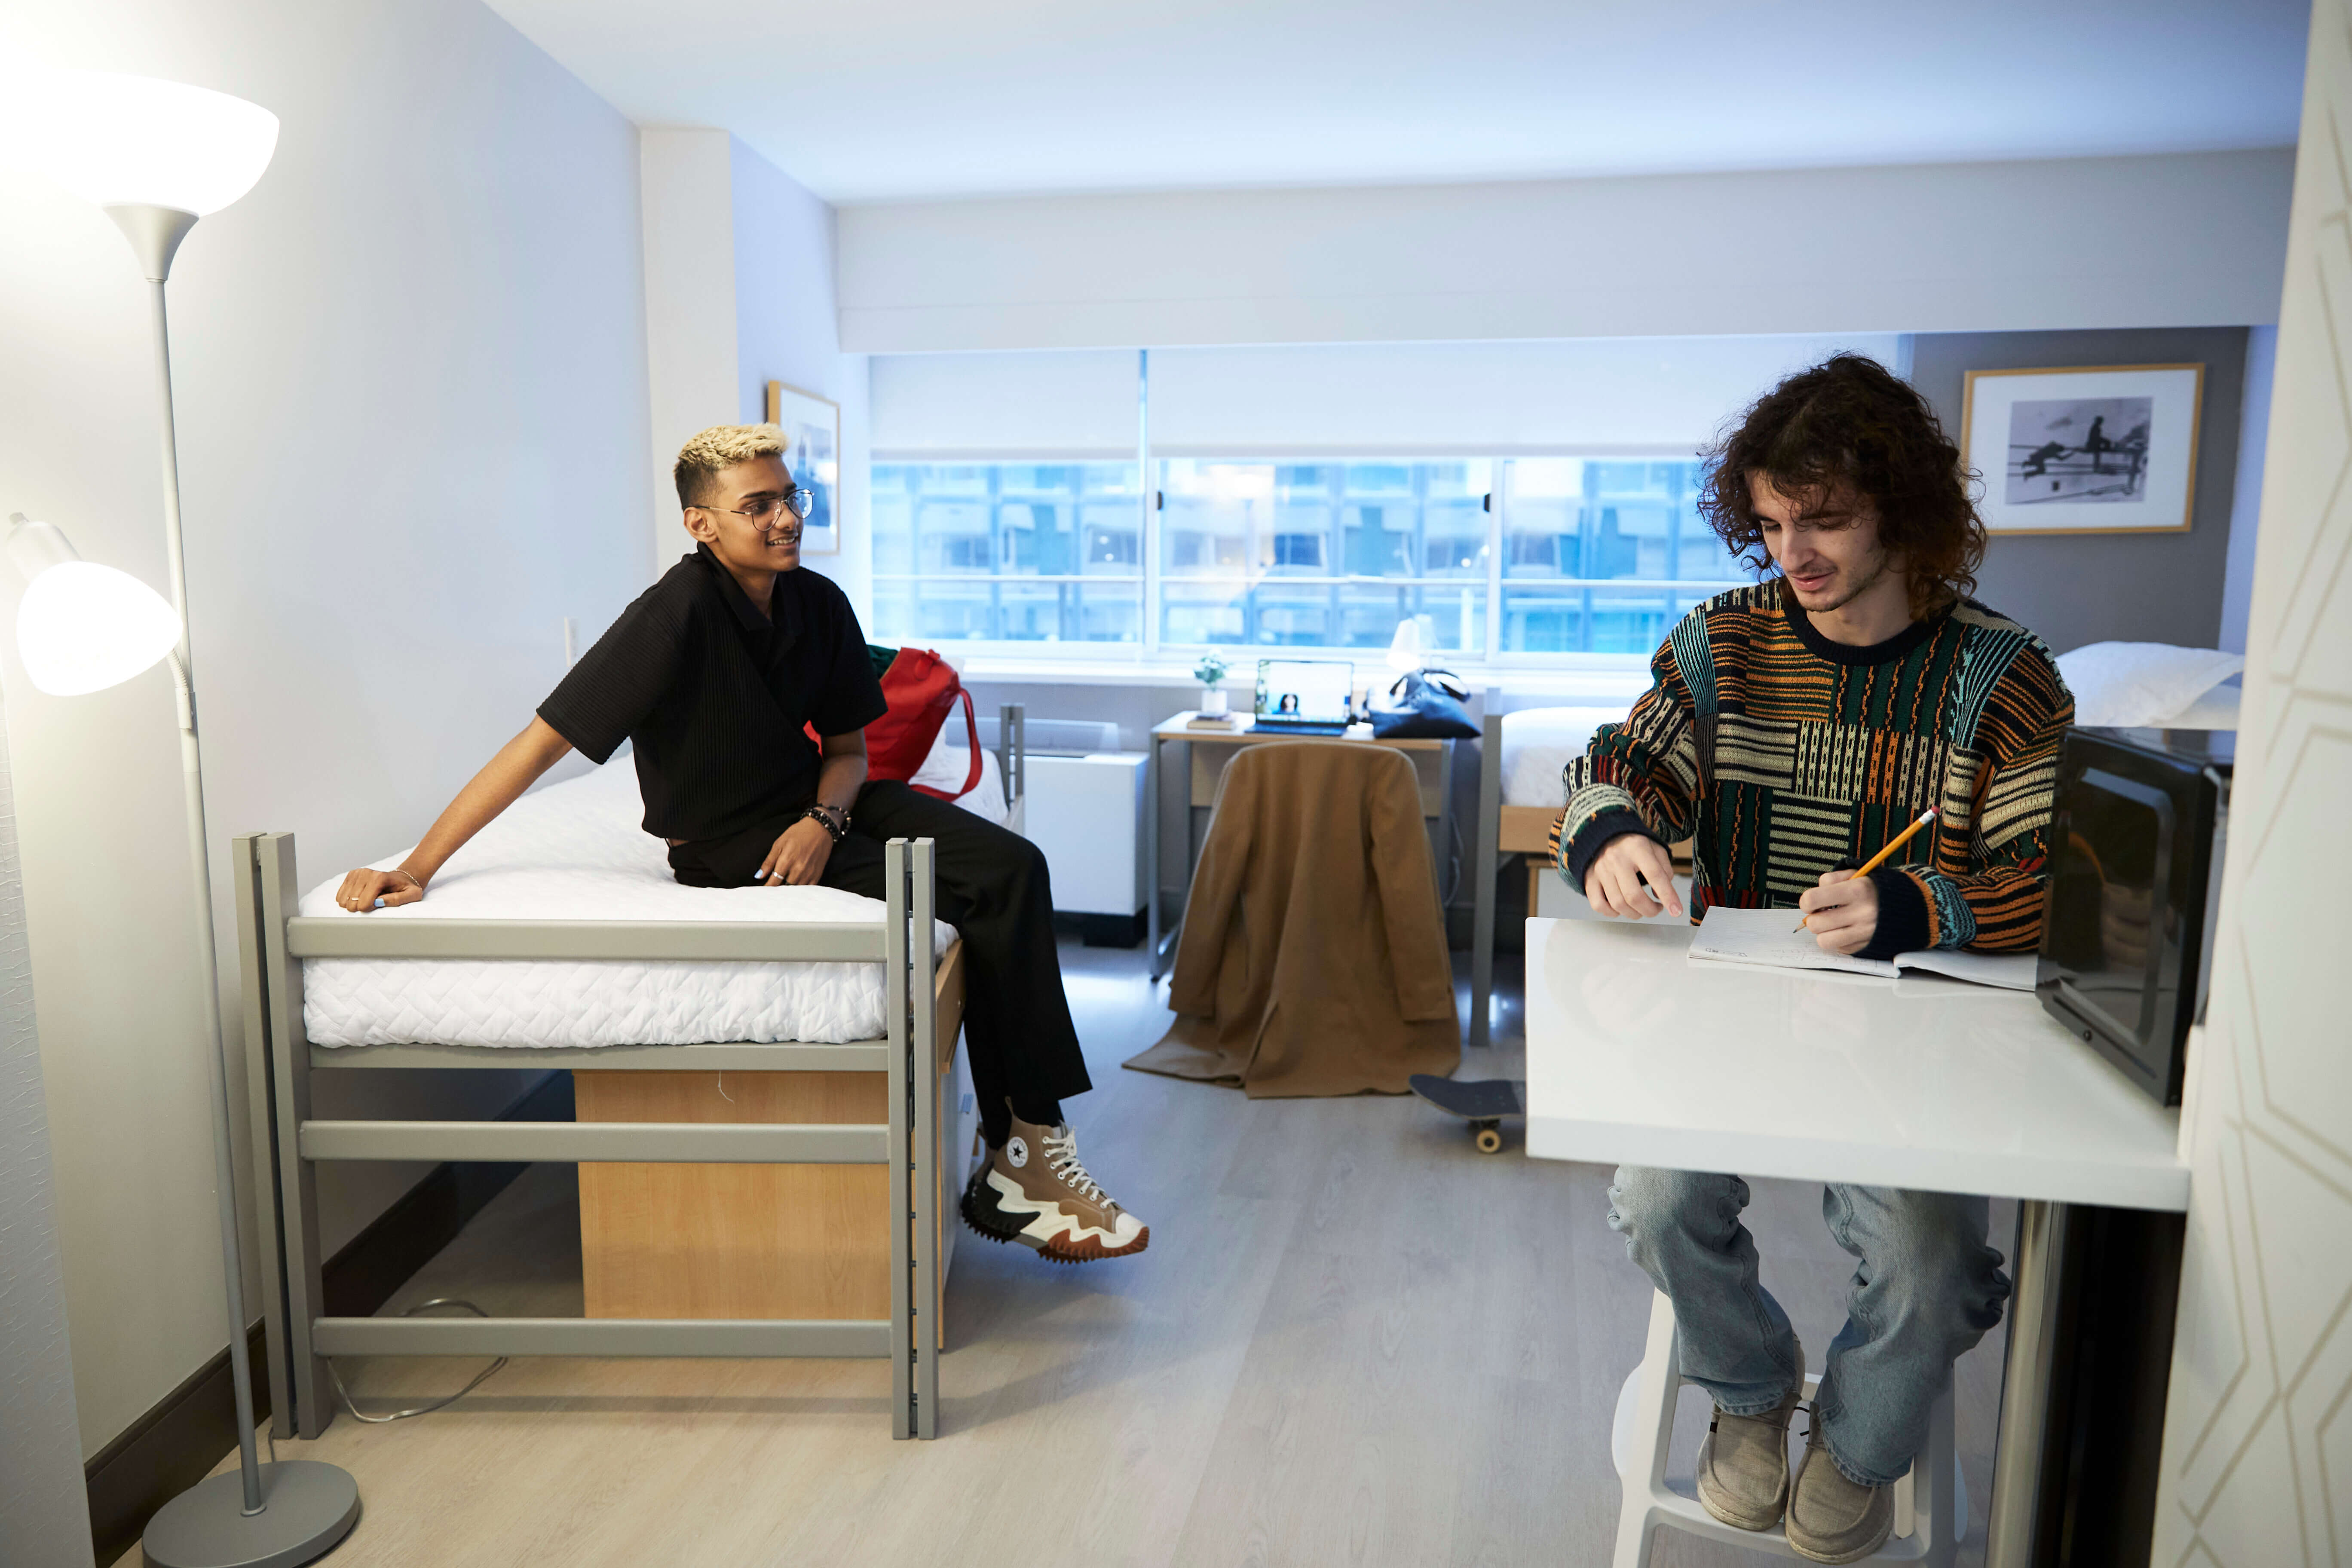 Two LIM students sit in their residence hall room. One is on his bed, while the other sits at a table to sketch